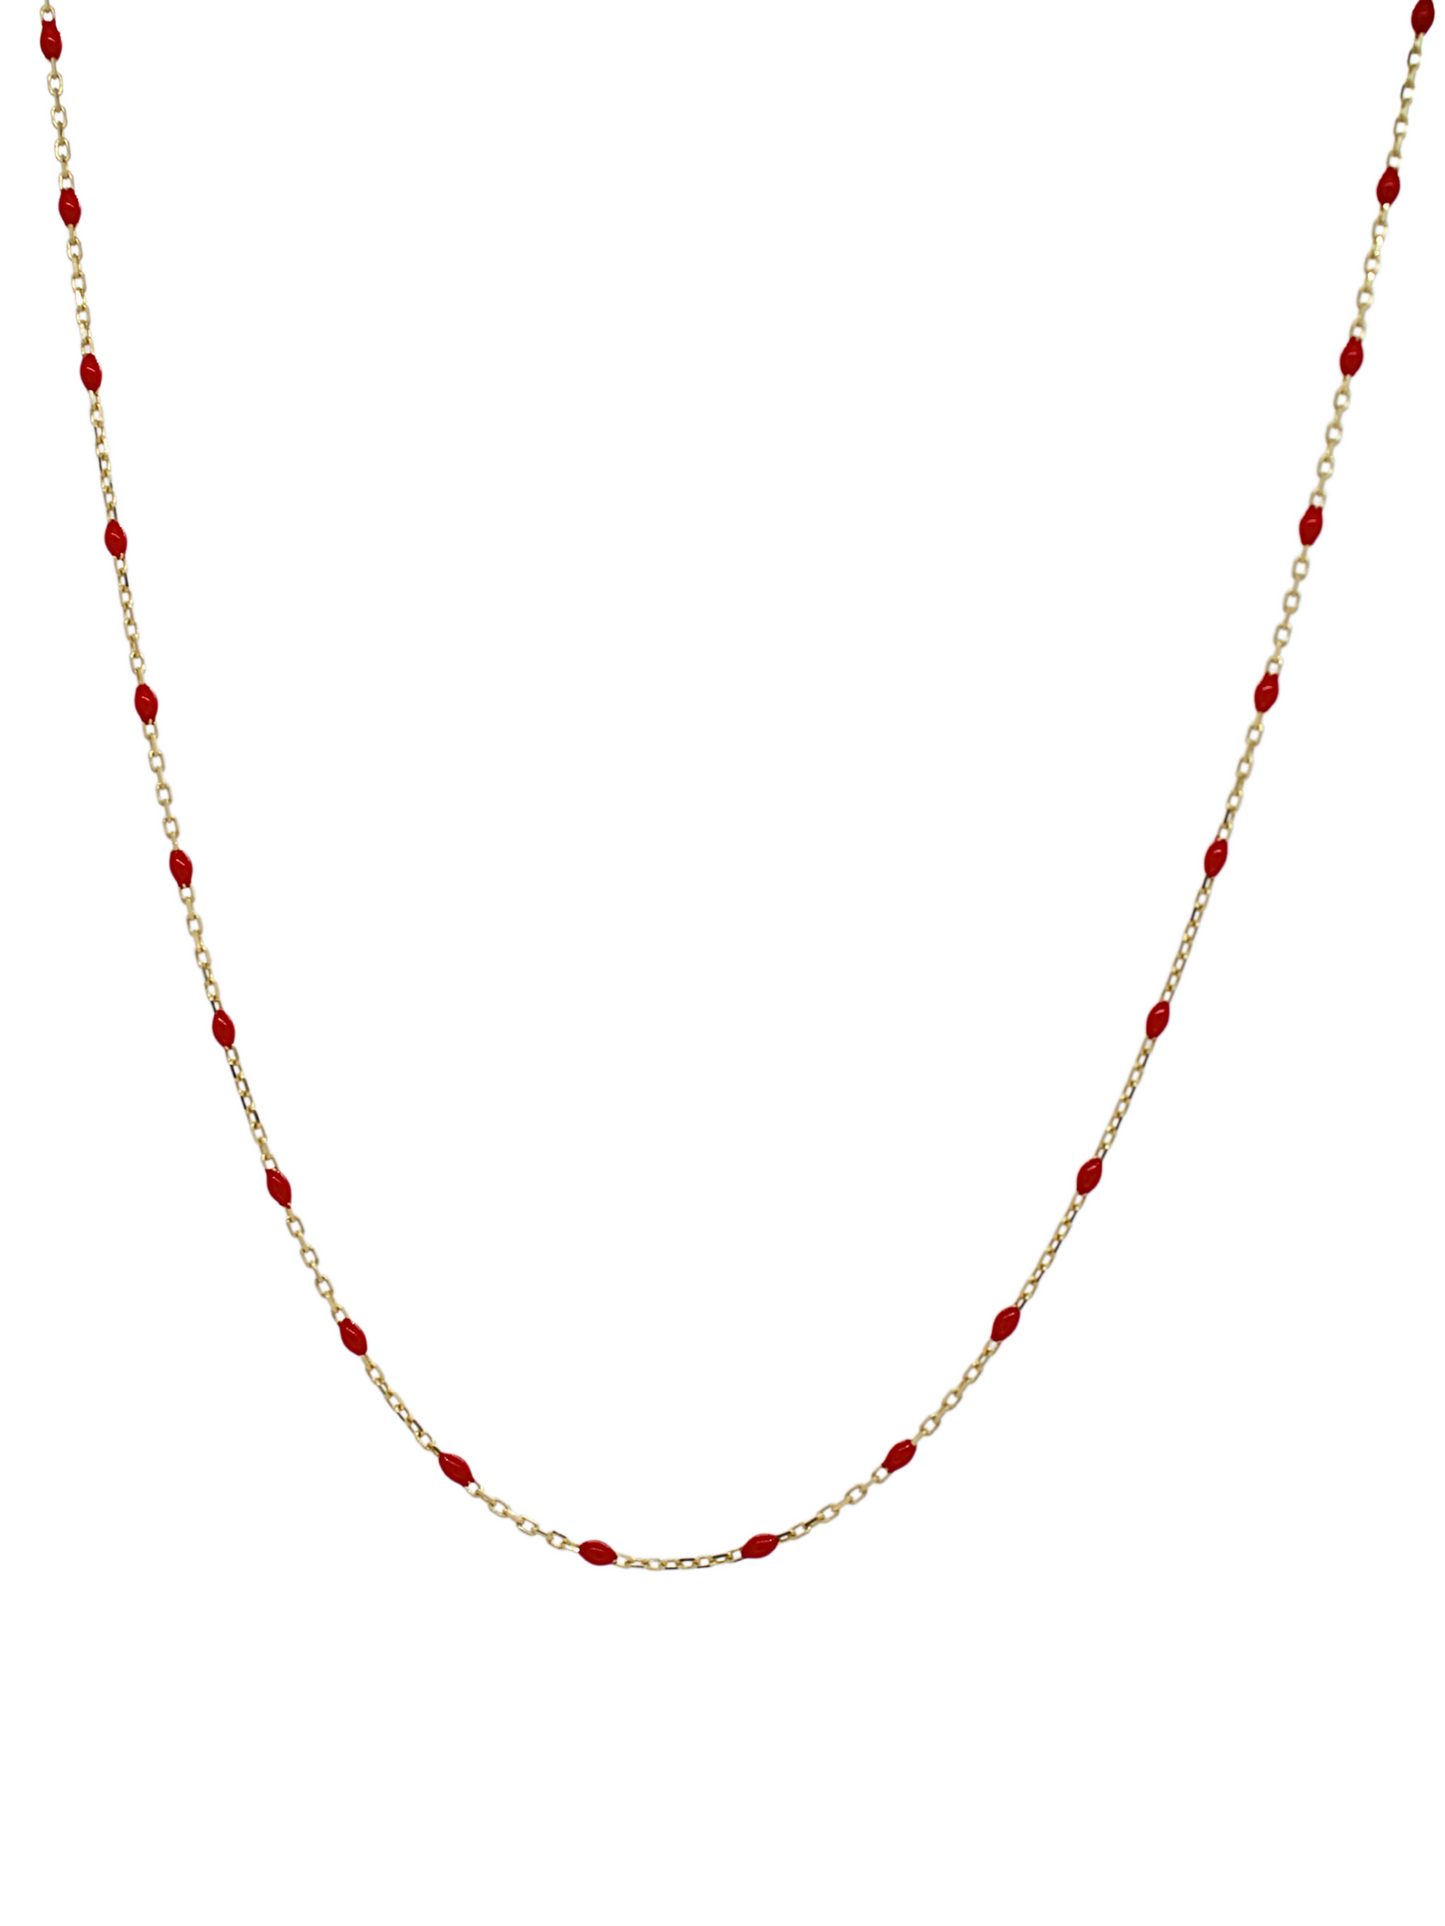 NECKLACE 20